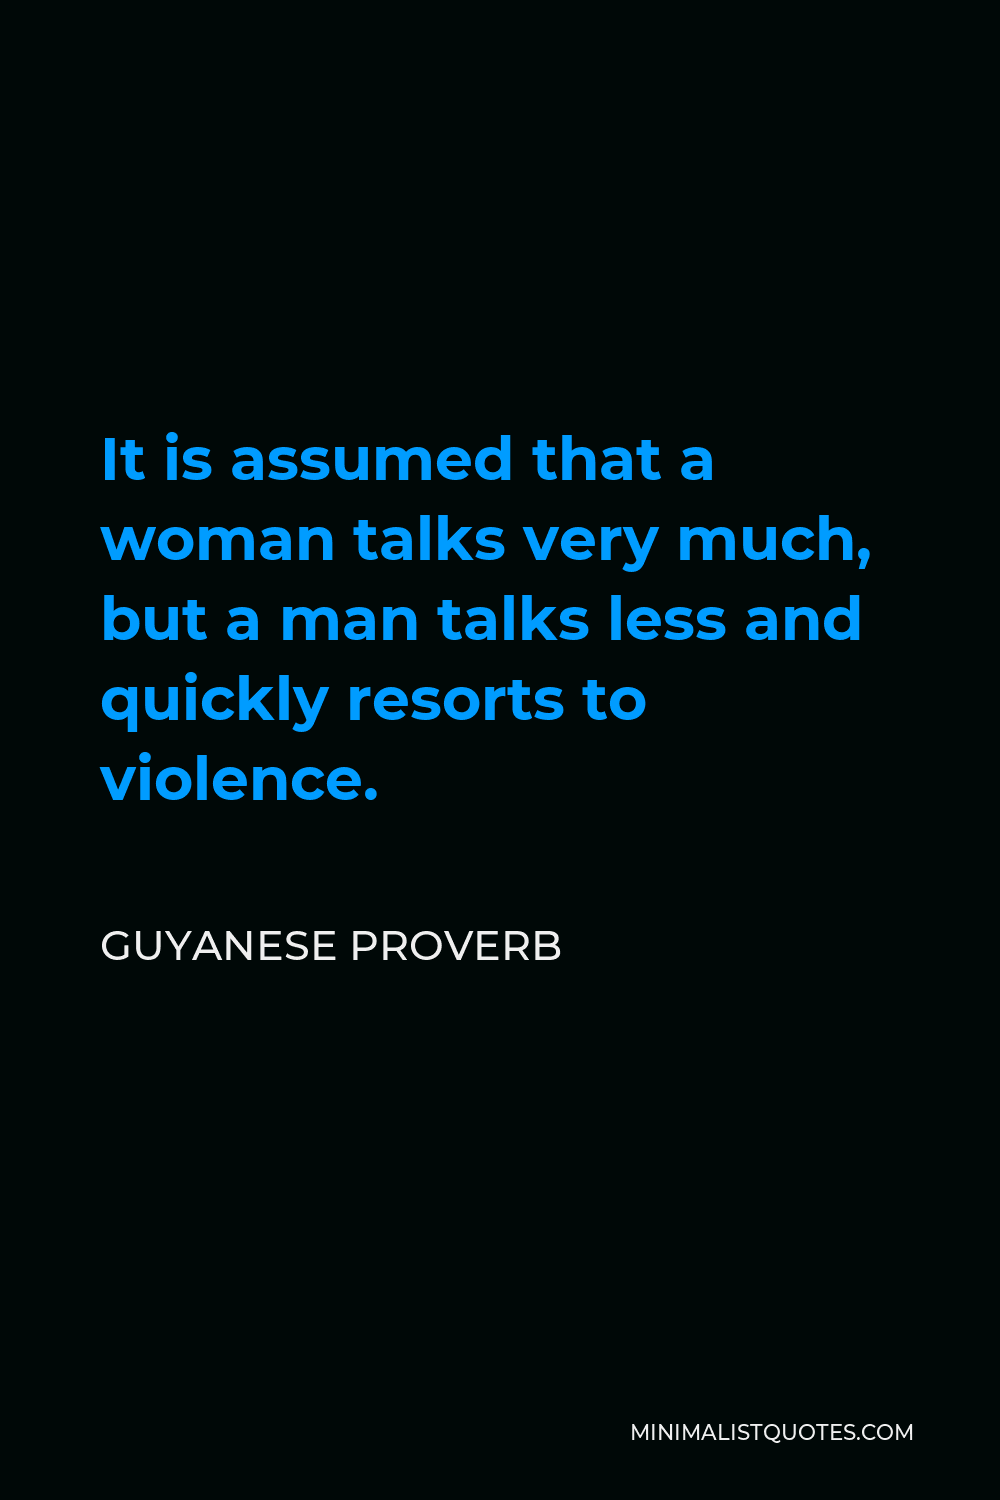 Guyanese Proverb Quote - It is assumed that a woman talks very much, but a man talks less and quickly resorts to violence.